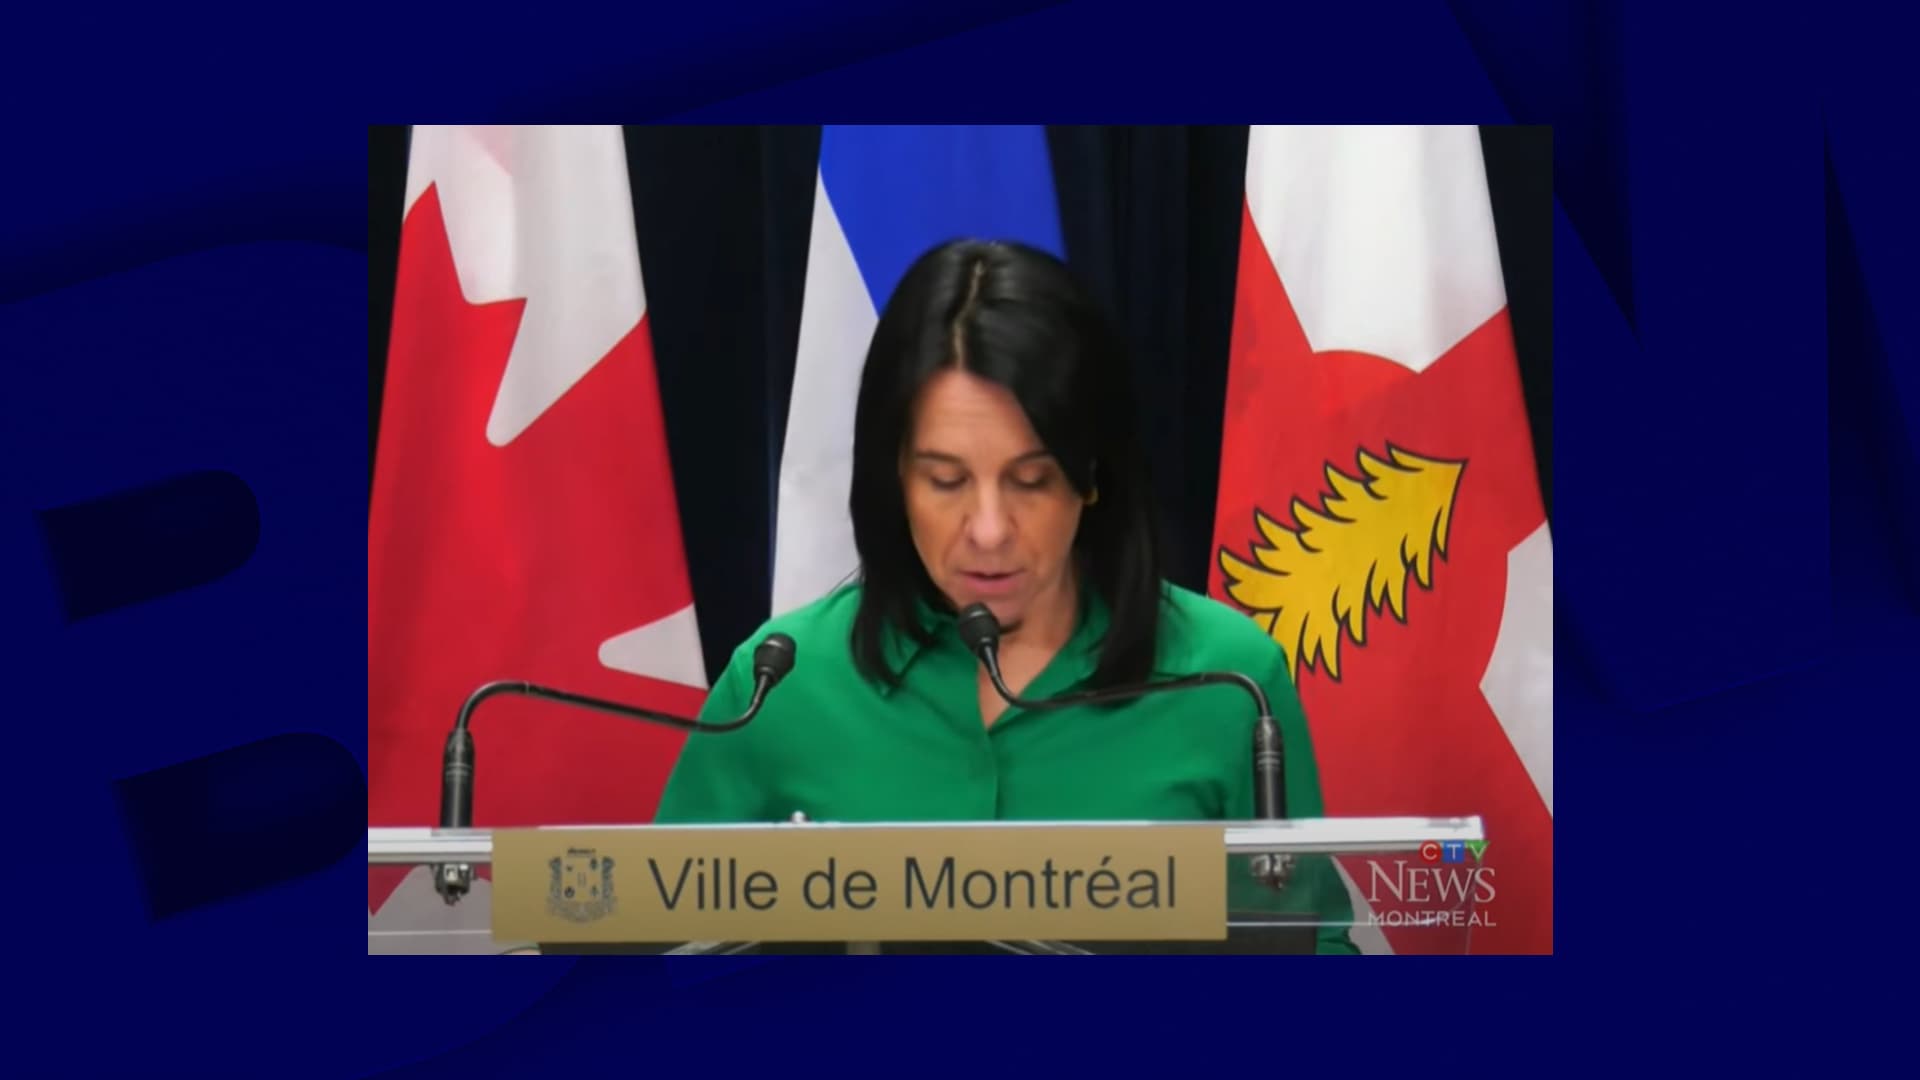 Montreal Mayor Valery Plante feels unwell in the middle of a press conference